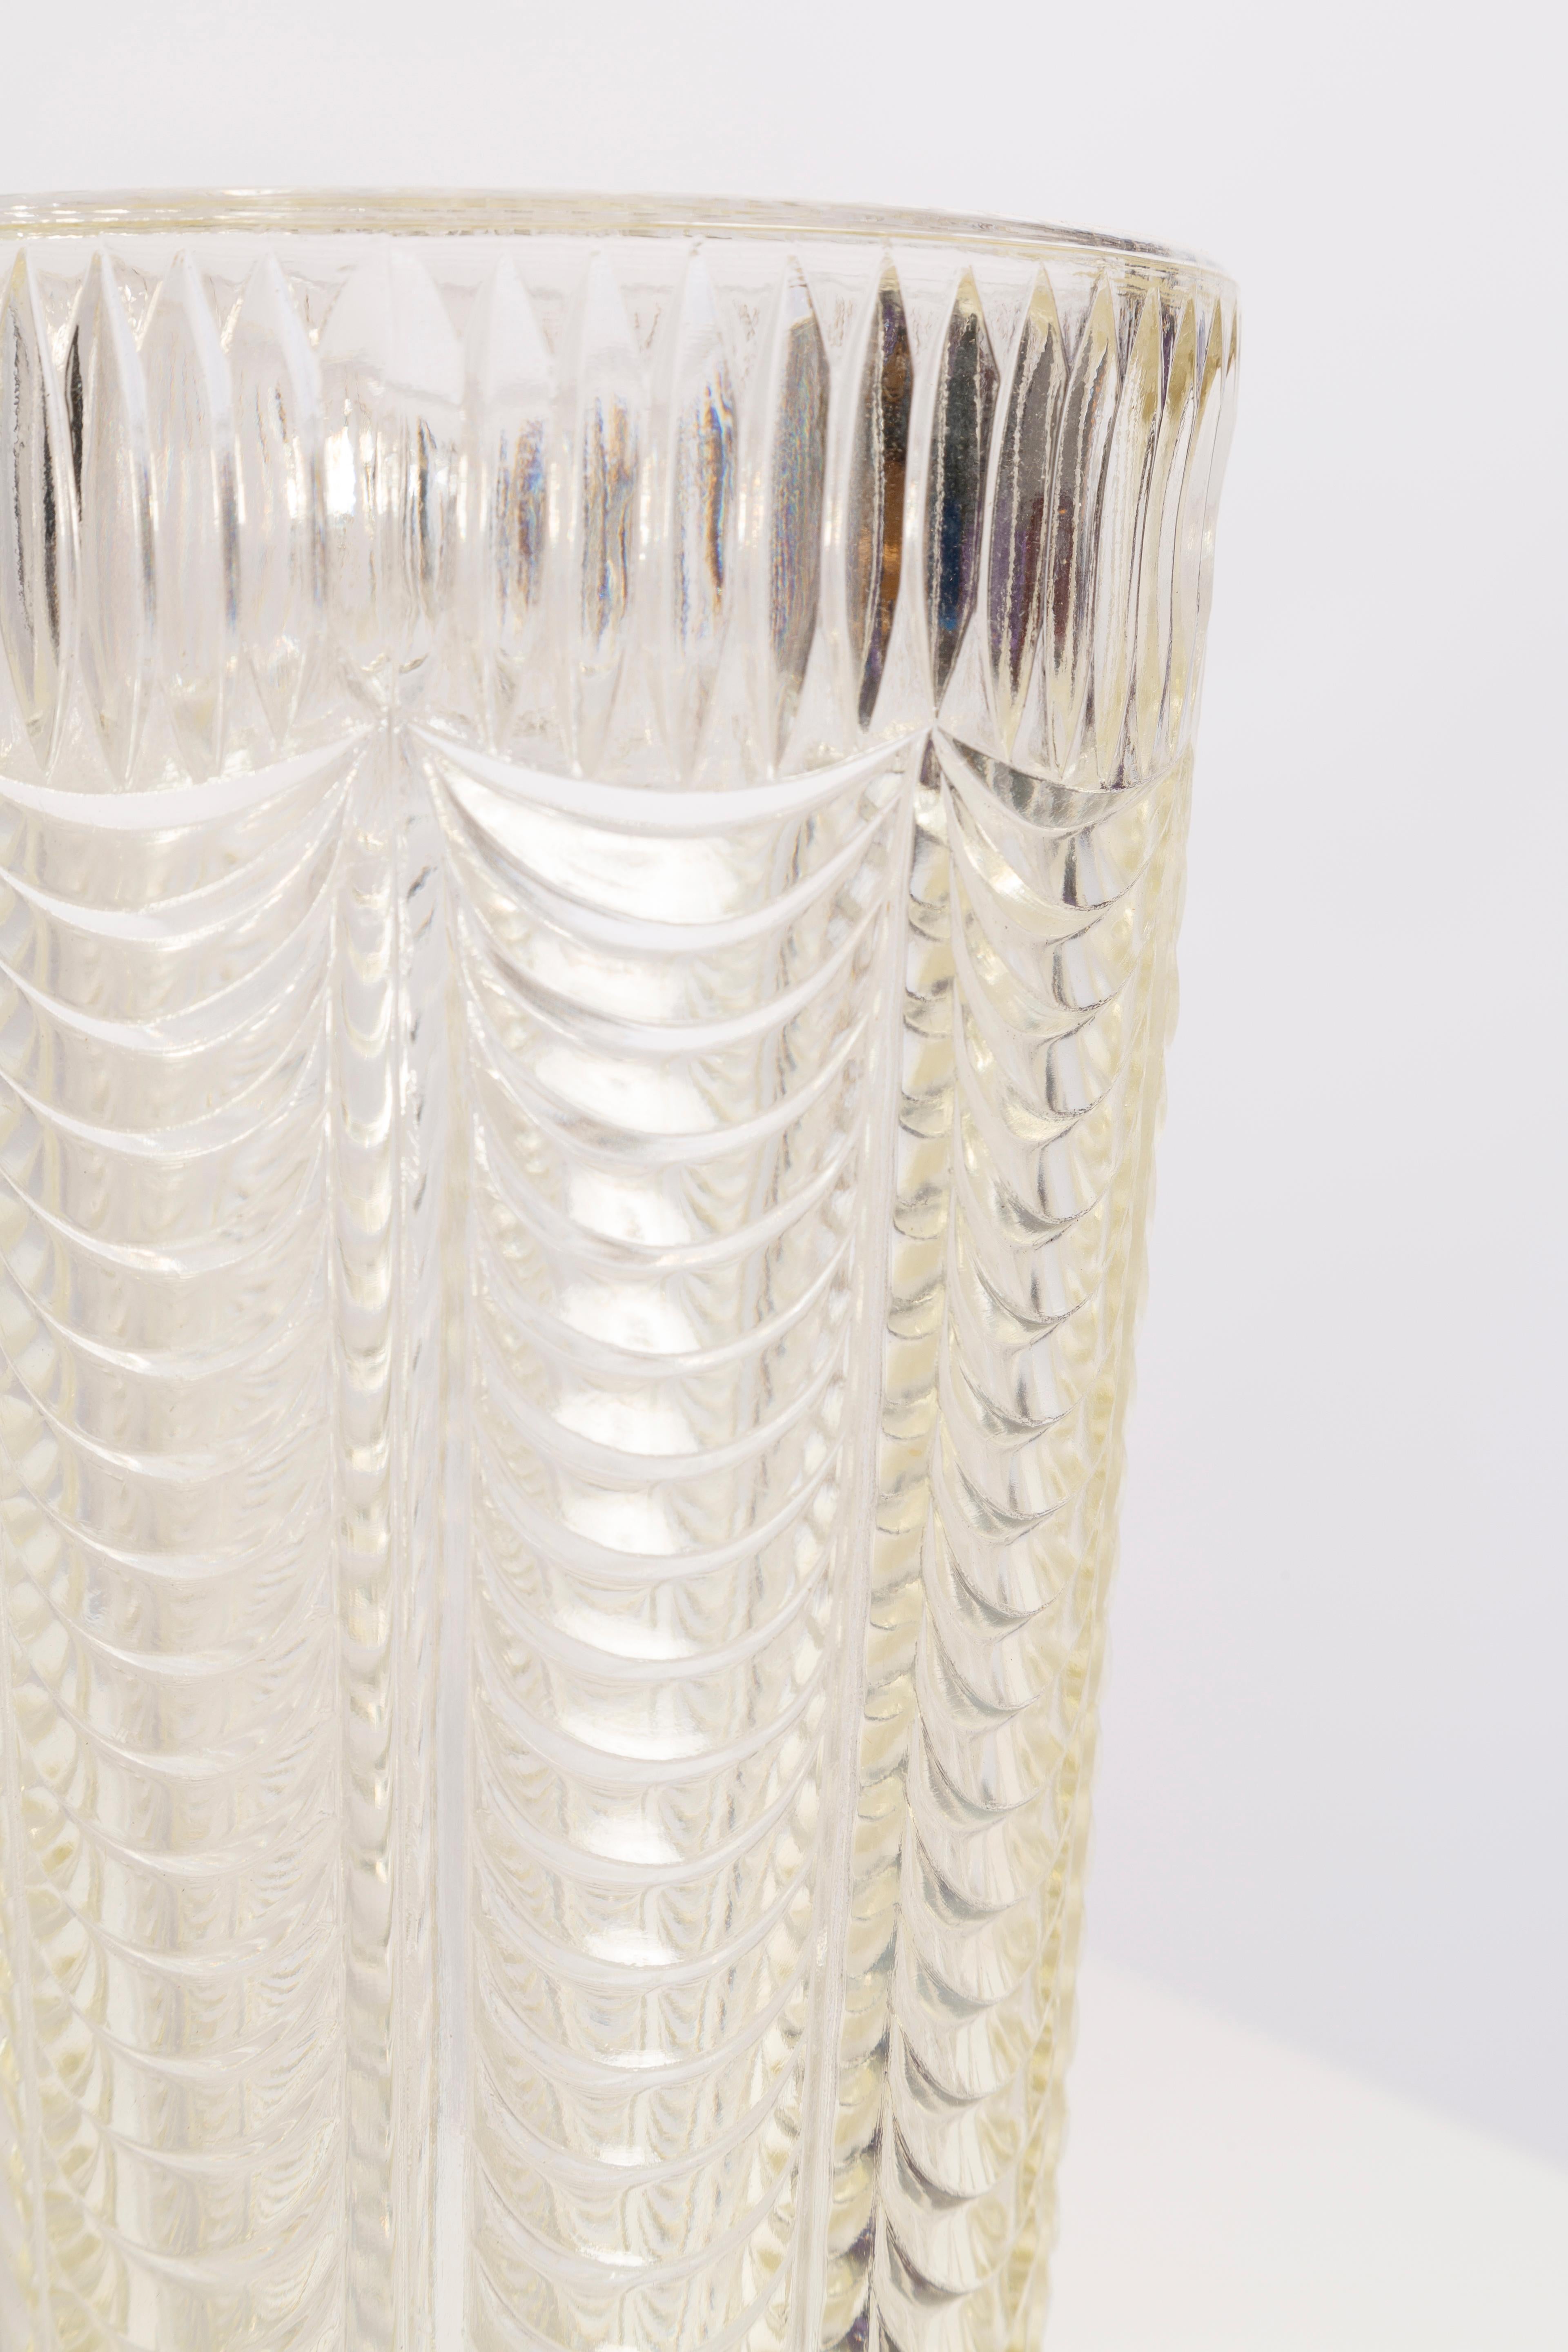 Mid-Century Crystal Transparent Vase, Italy, 1960s In Excellent Condition For Sale In 05-080 Hornowek, PL